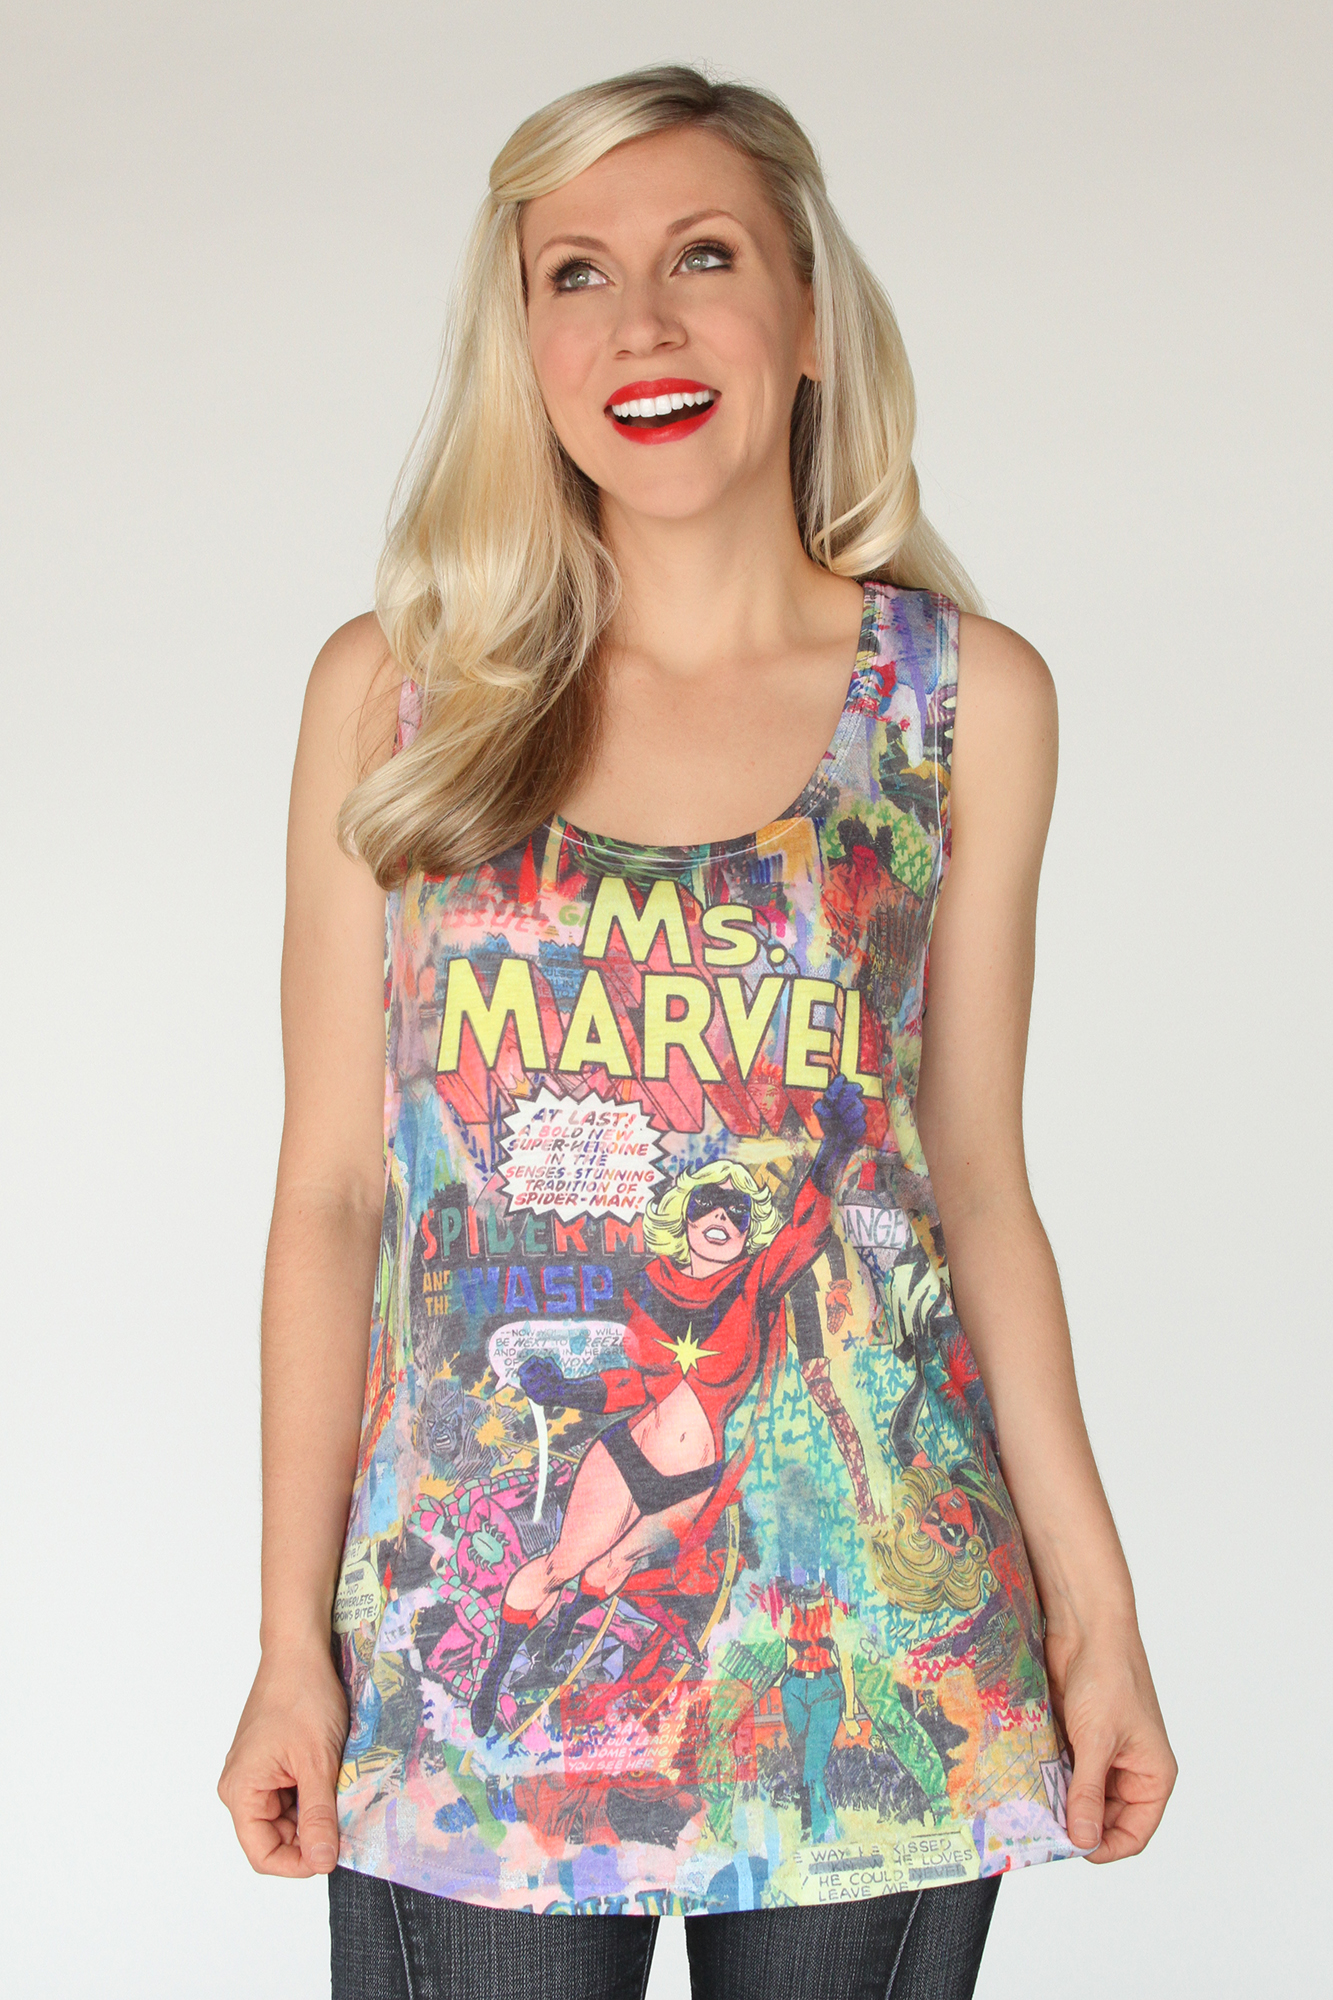 Her Universe has designed this beautiful Ms. Marvel art piece as a part of the graffiti collection. Featuring a collage of the women of Marvel with super heroine Ms. Marvel highlighted in the center.